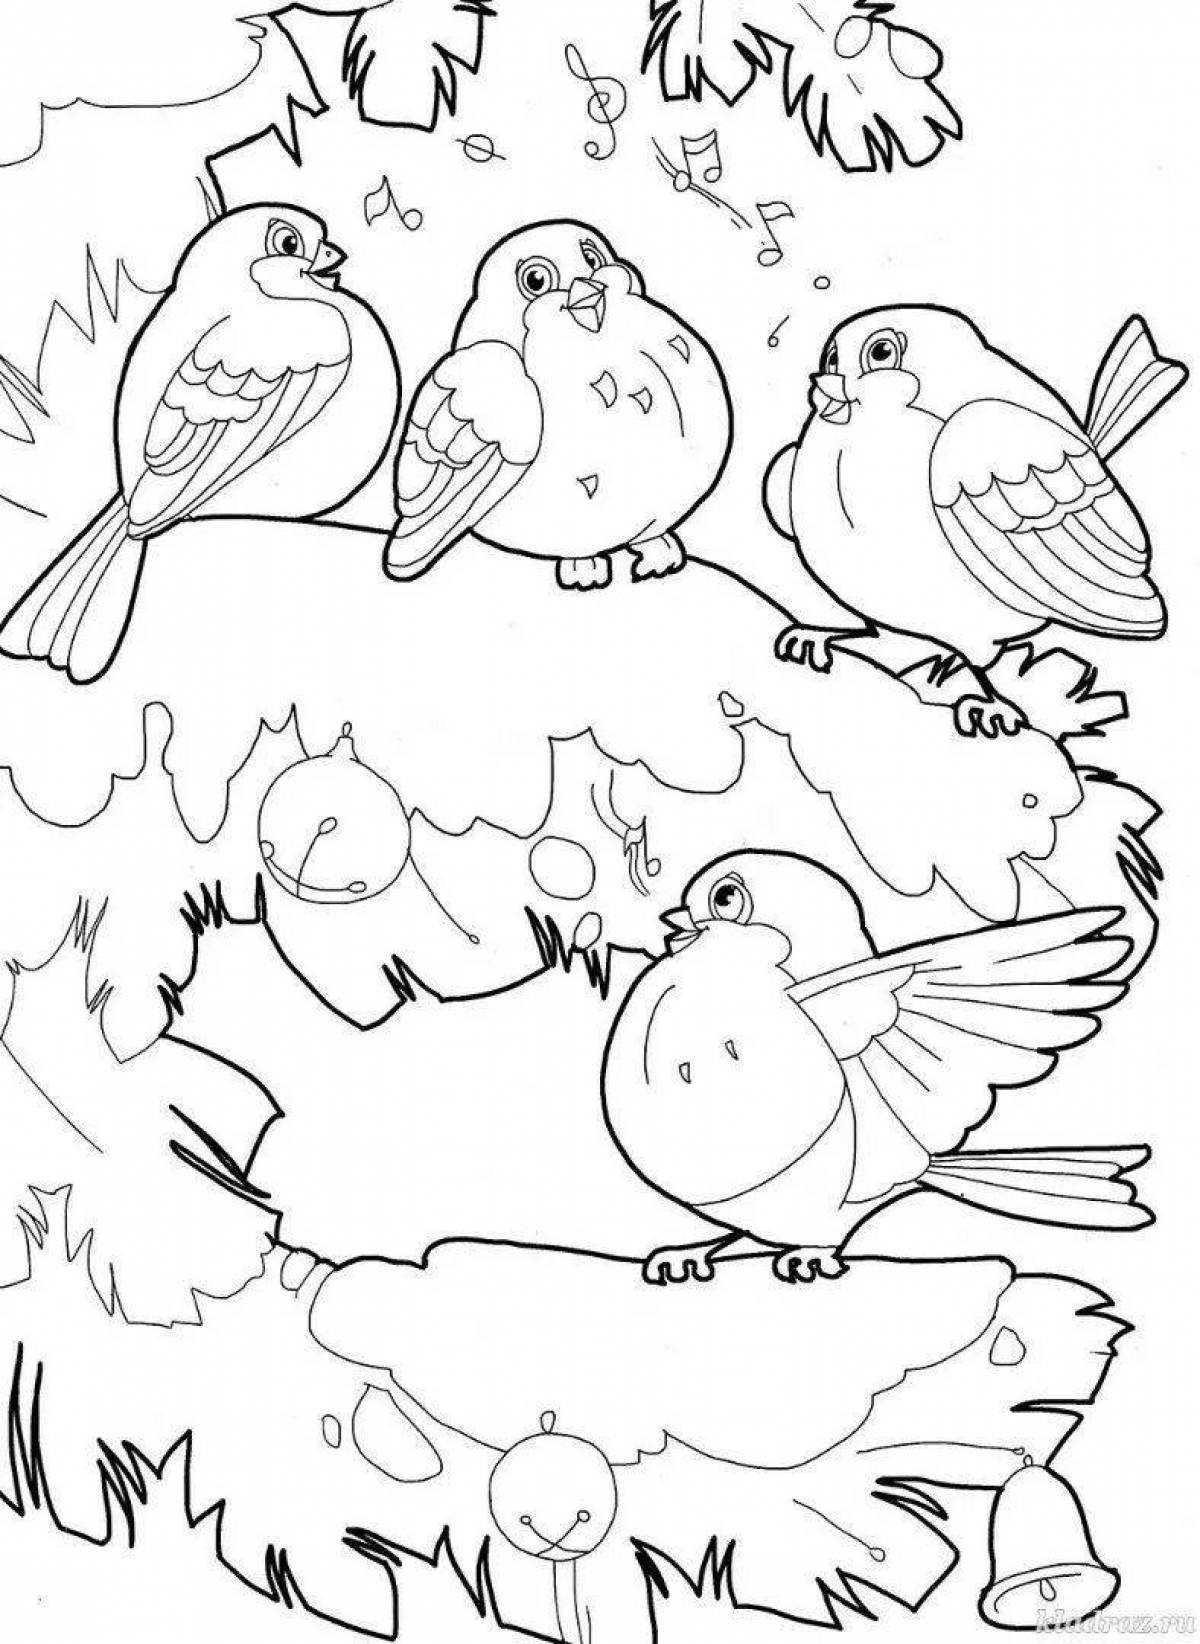 Wonderful coloring pages of wintering birds for children 2-3 years old